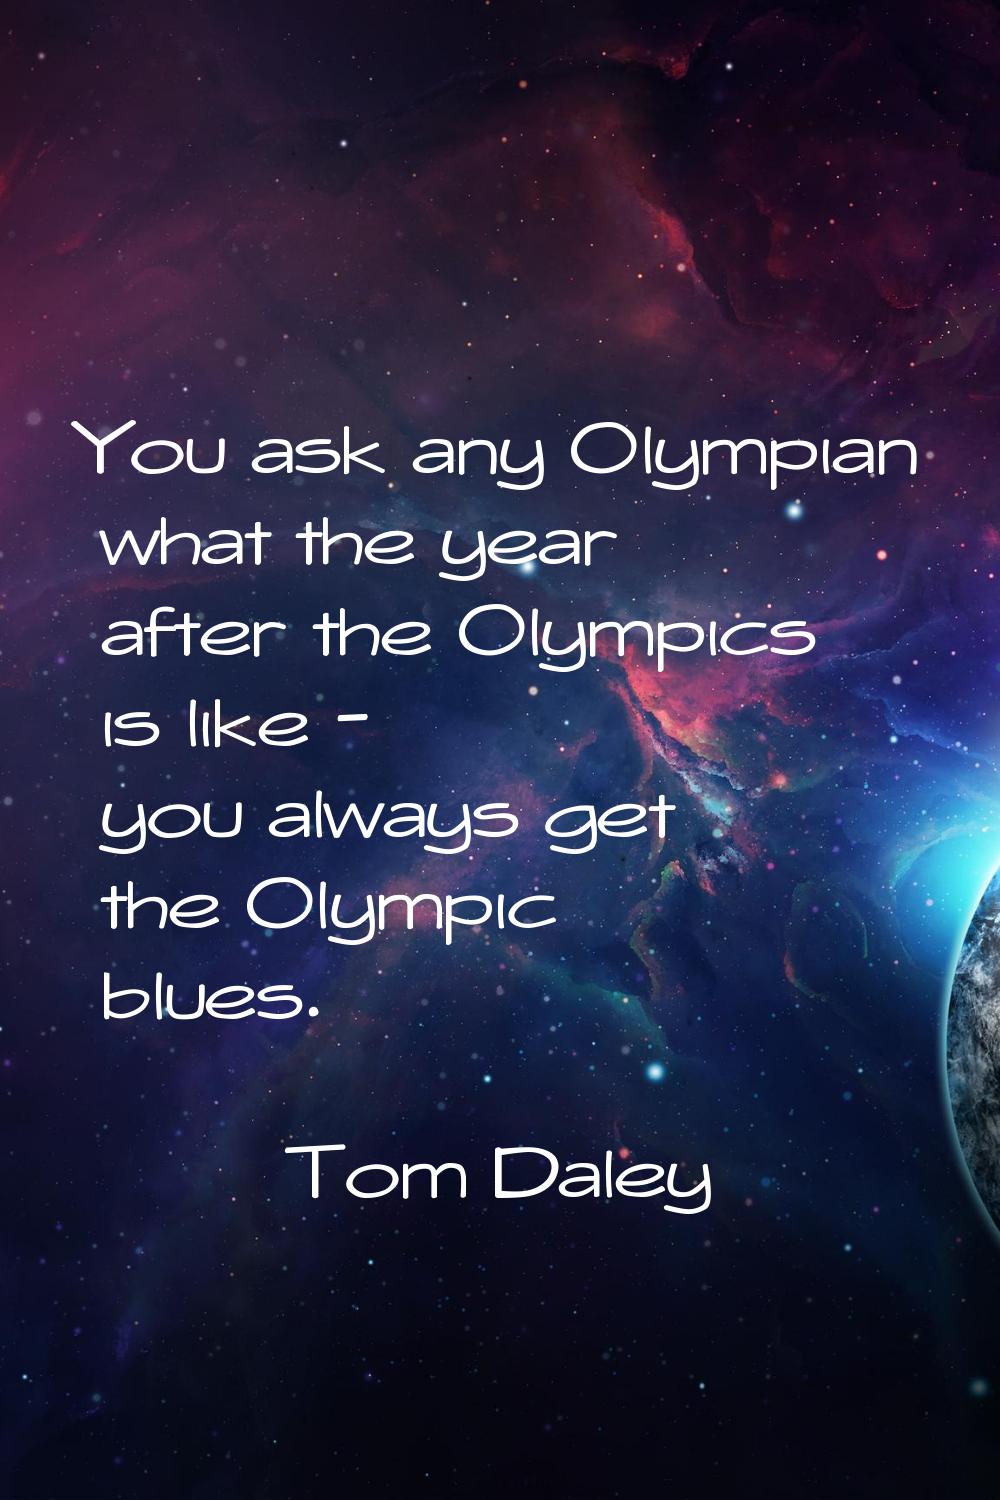 You ask any Olympian what the year after the Olympics is like - you always get the Olympic blues.